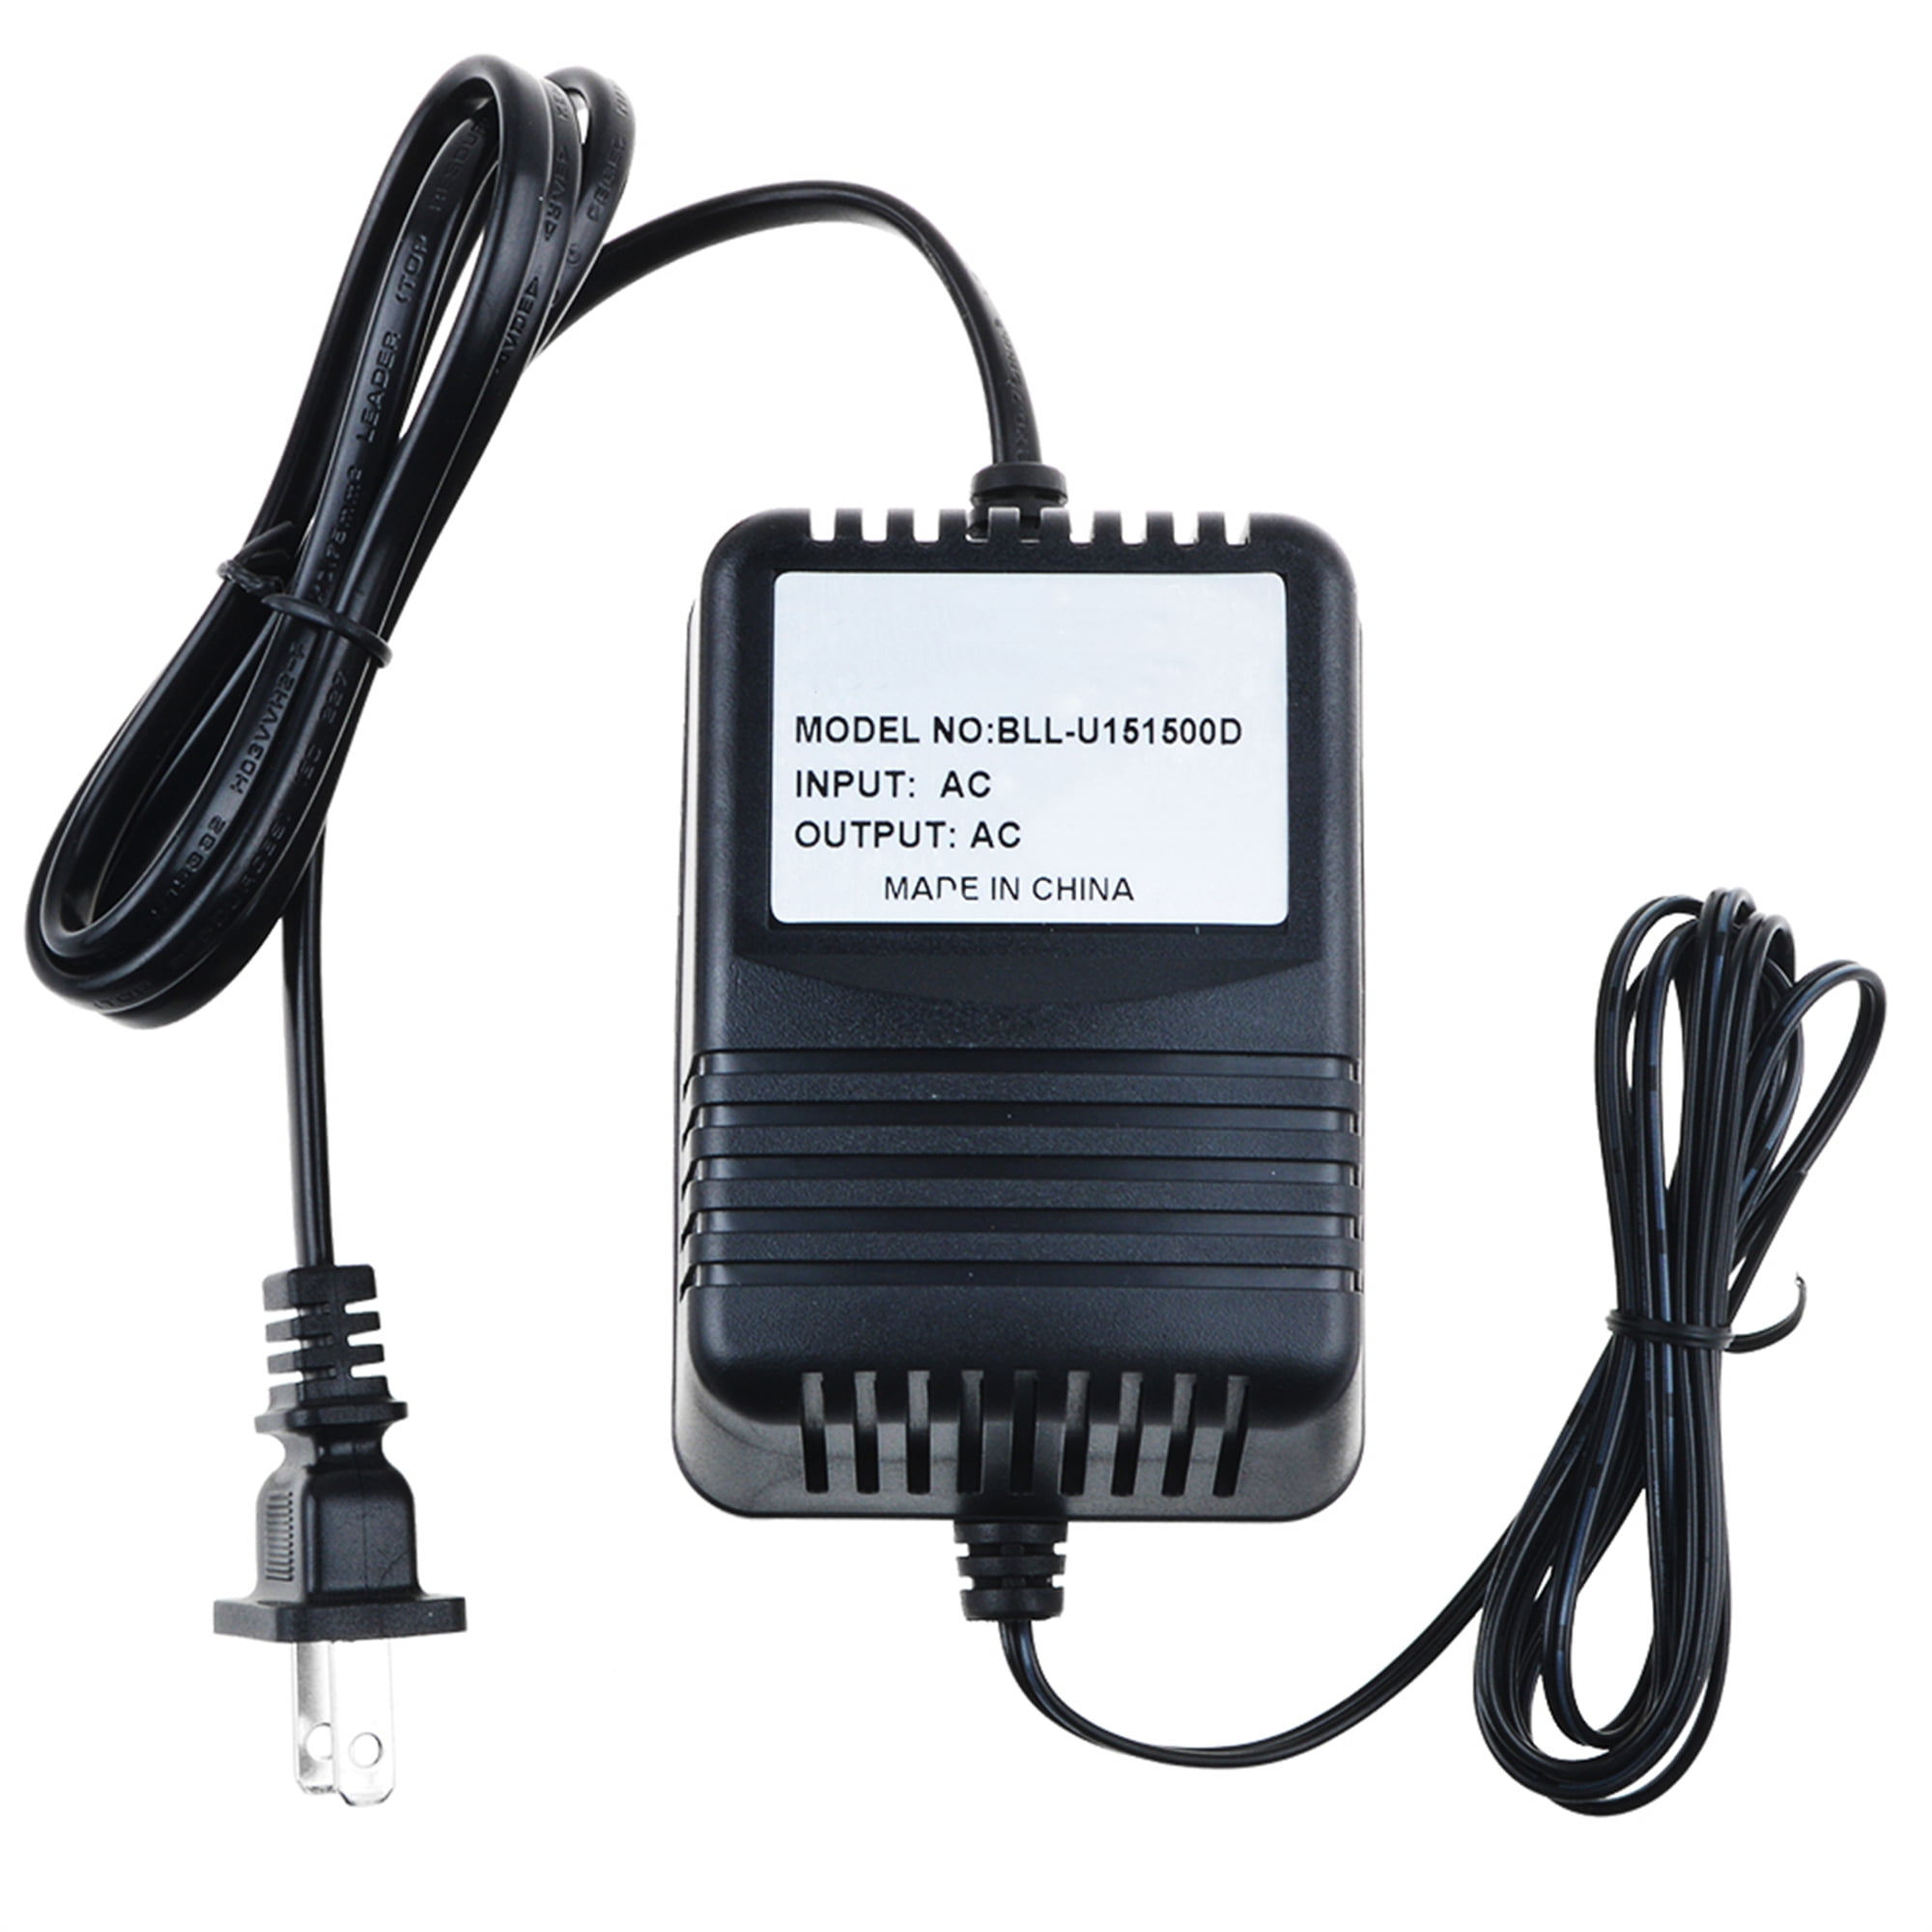 AC to AC Adapter for Triad Magnetics Class 2 WAU24-450 Power Supply Cord Cable 